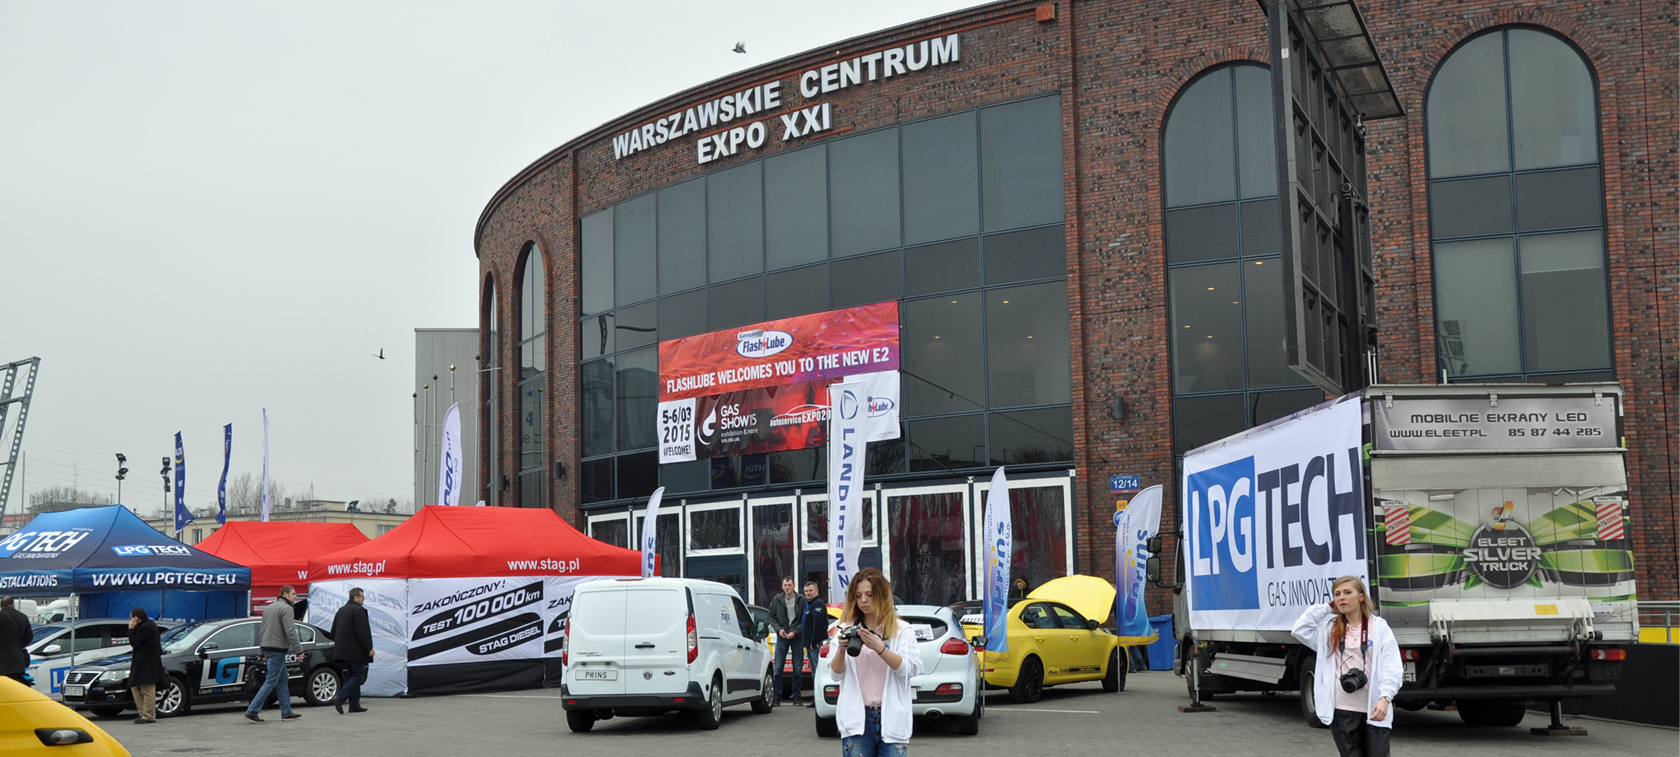 GasShow 2015 - may the show commence!